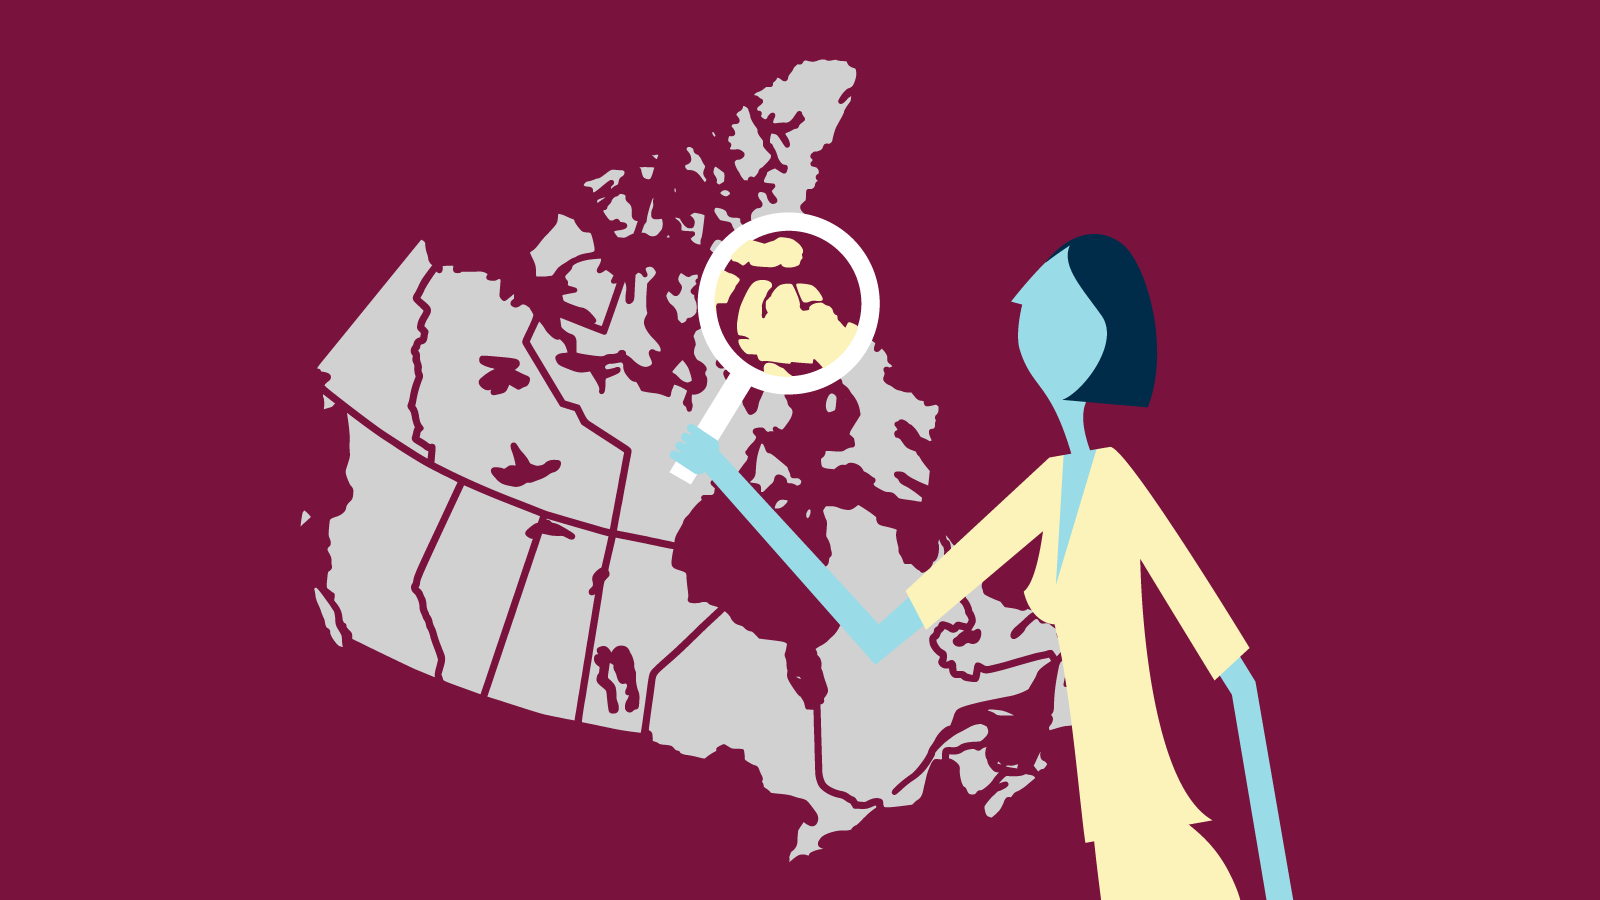 Illustration of woman looking at map of Canada through magnifying glass on burgundy background.